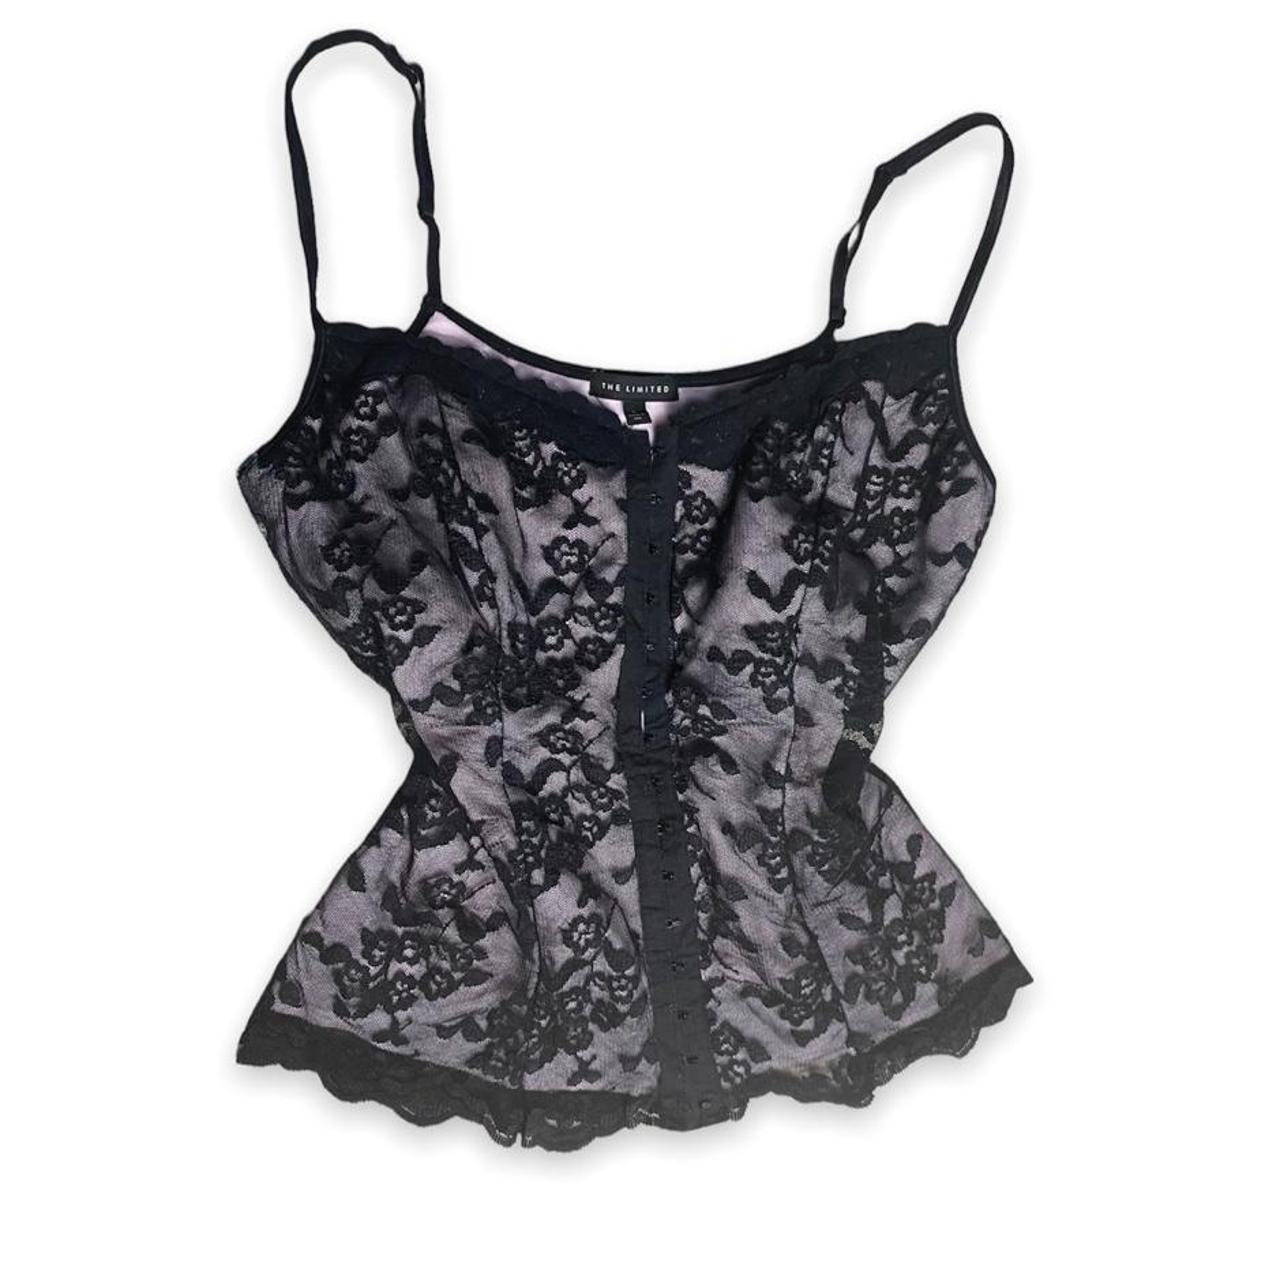 Product Image 1 - Beautiful gothic lacey floral top/